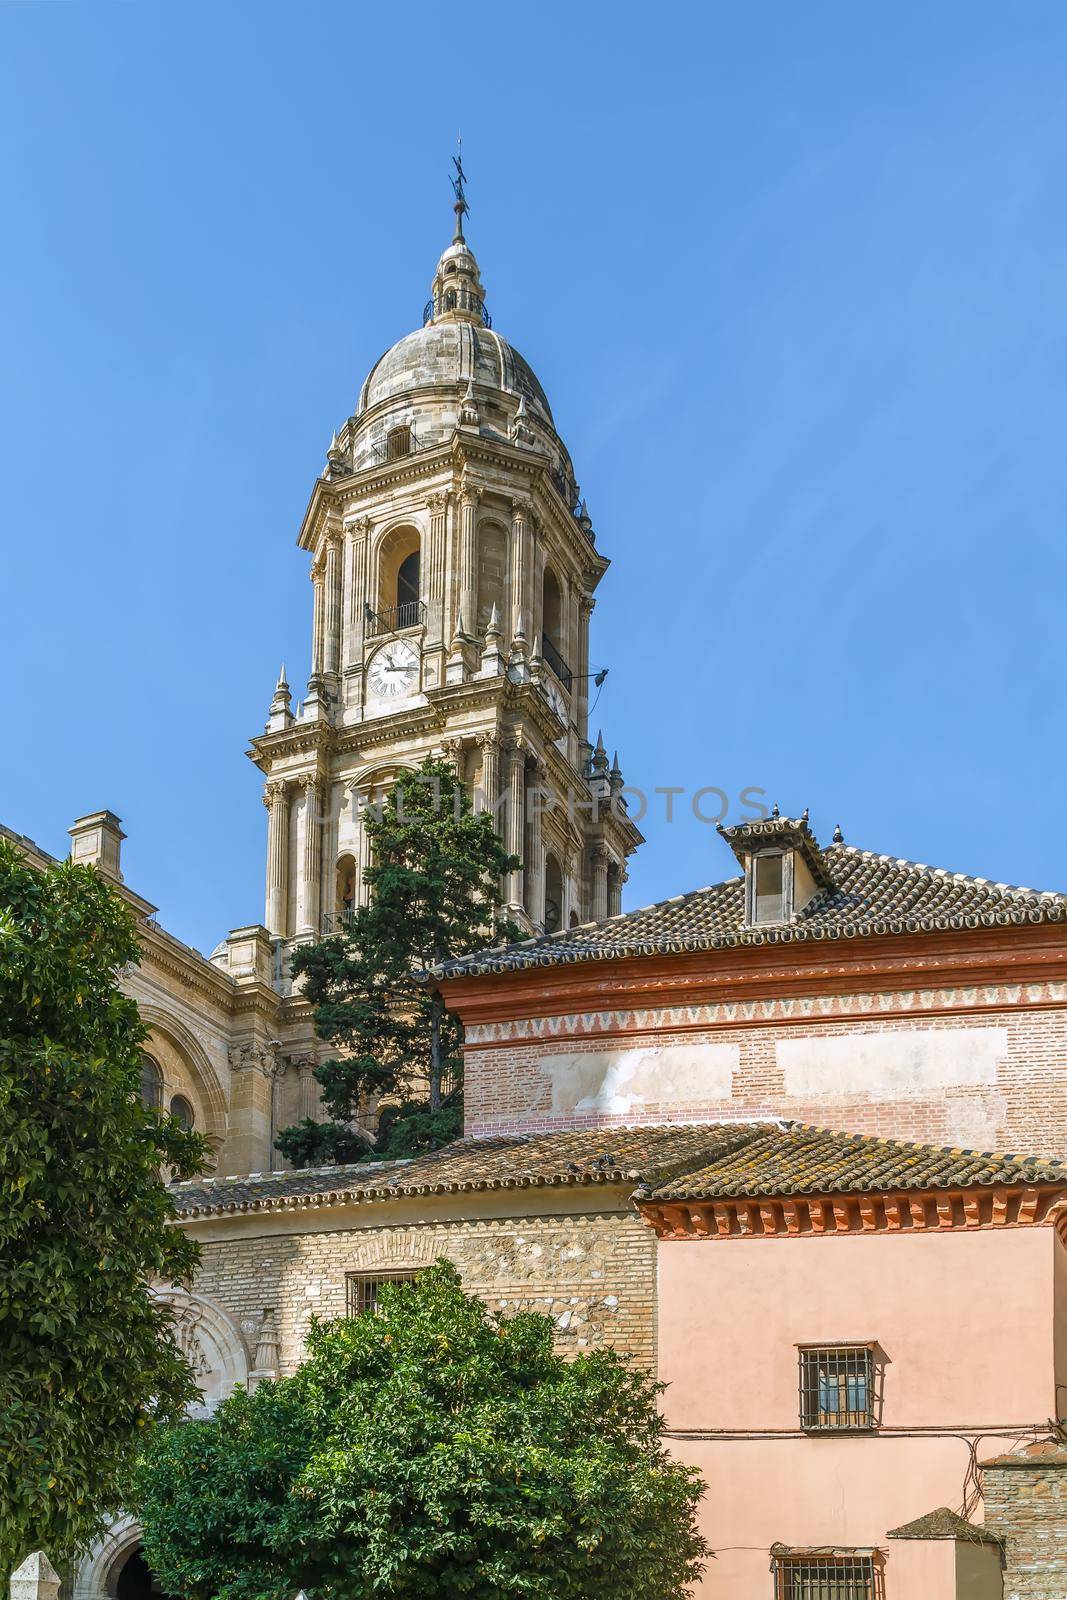 Cathedral of Malaga is a Renaissance church in the city of Malaga in Andalusia in southern Spain.It was constructed between 1528 and 1782. Tower